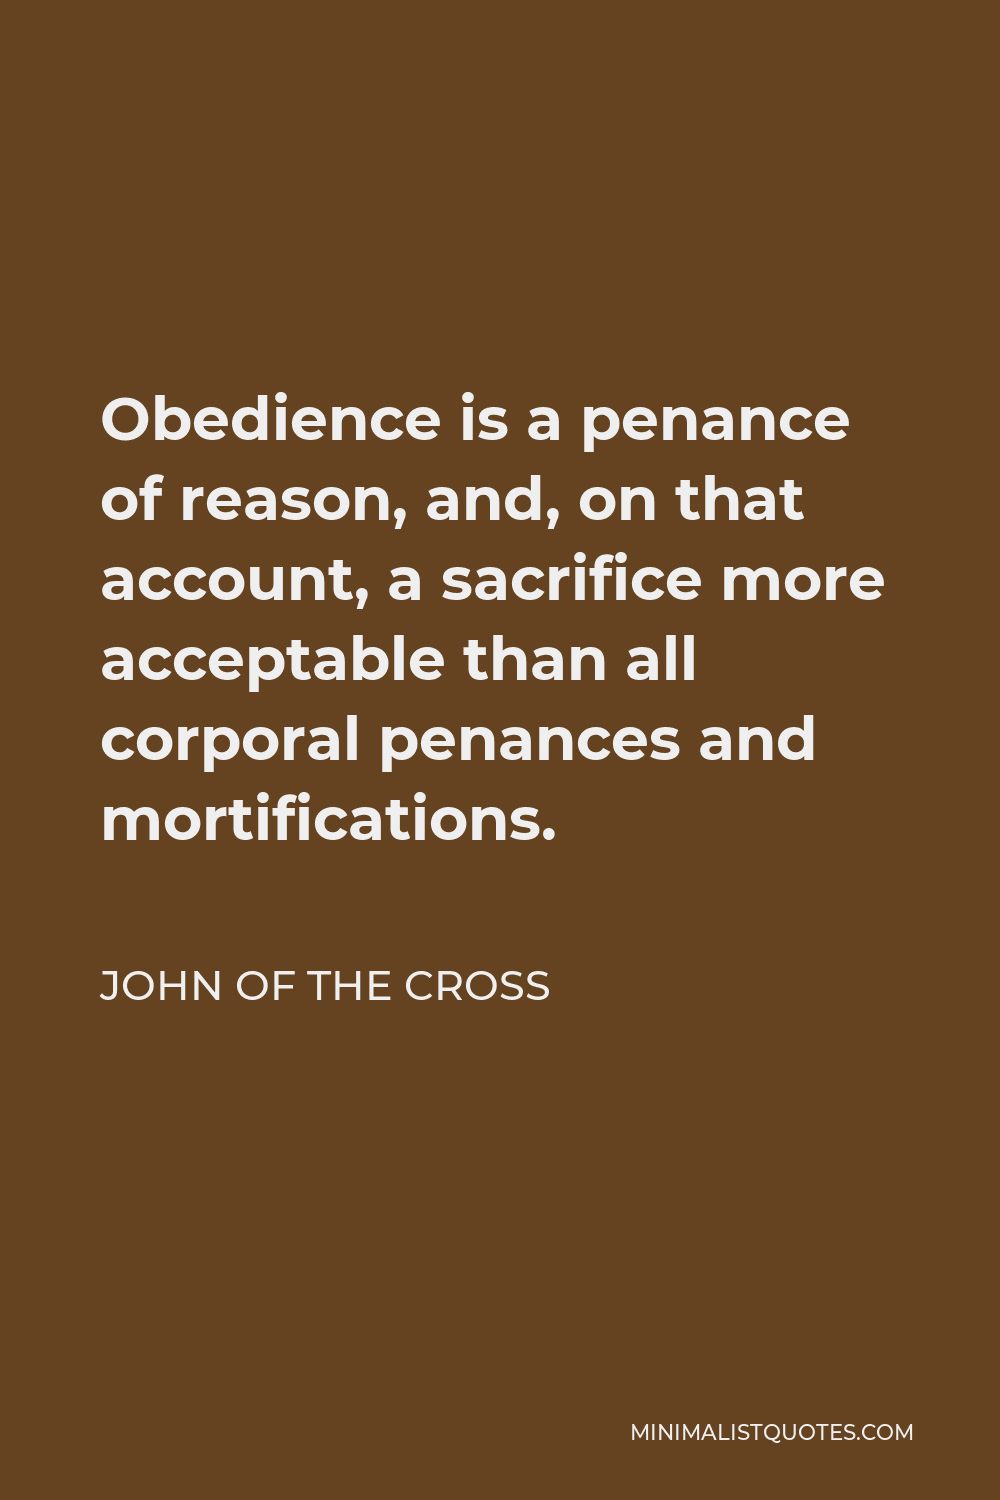 John of the Cross Quote - Obedience is a penance of reason, and, on that account, a sacrifice more acceptable than all corporal penances and mortifications.